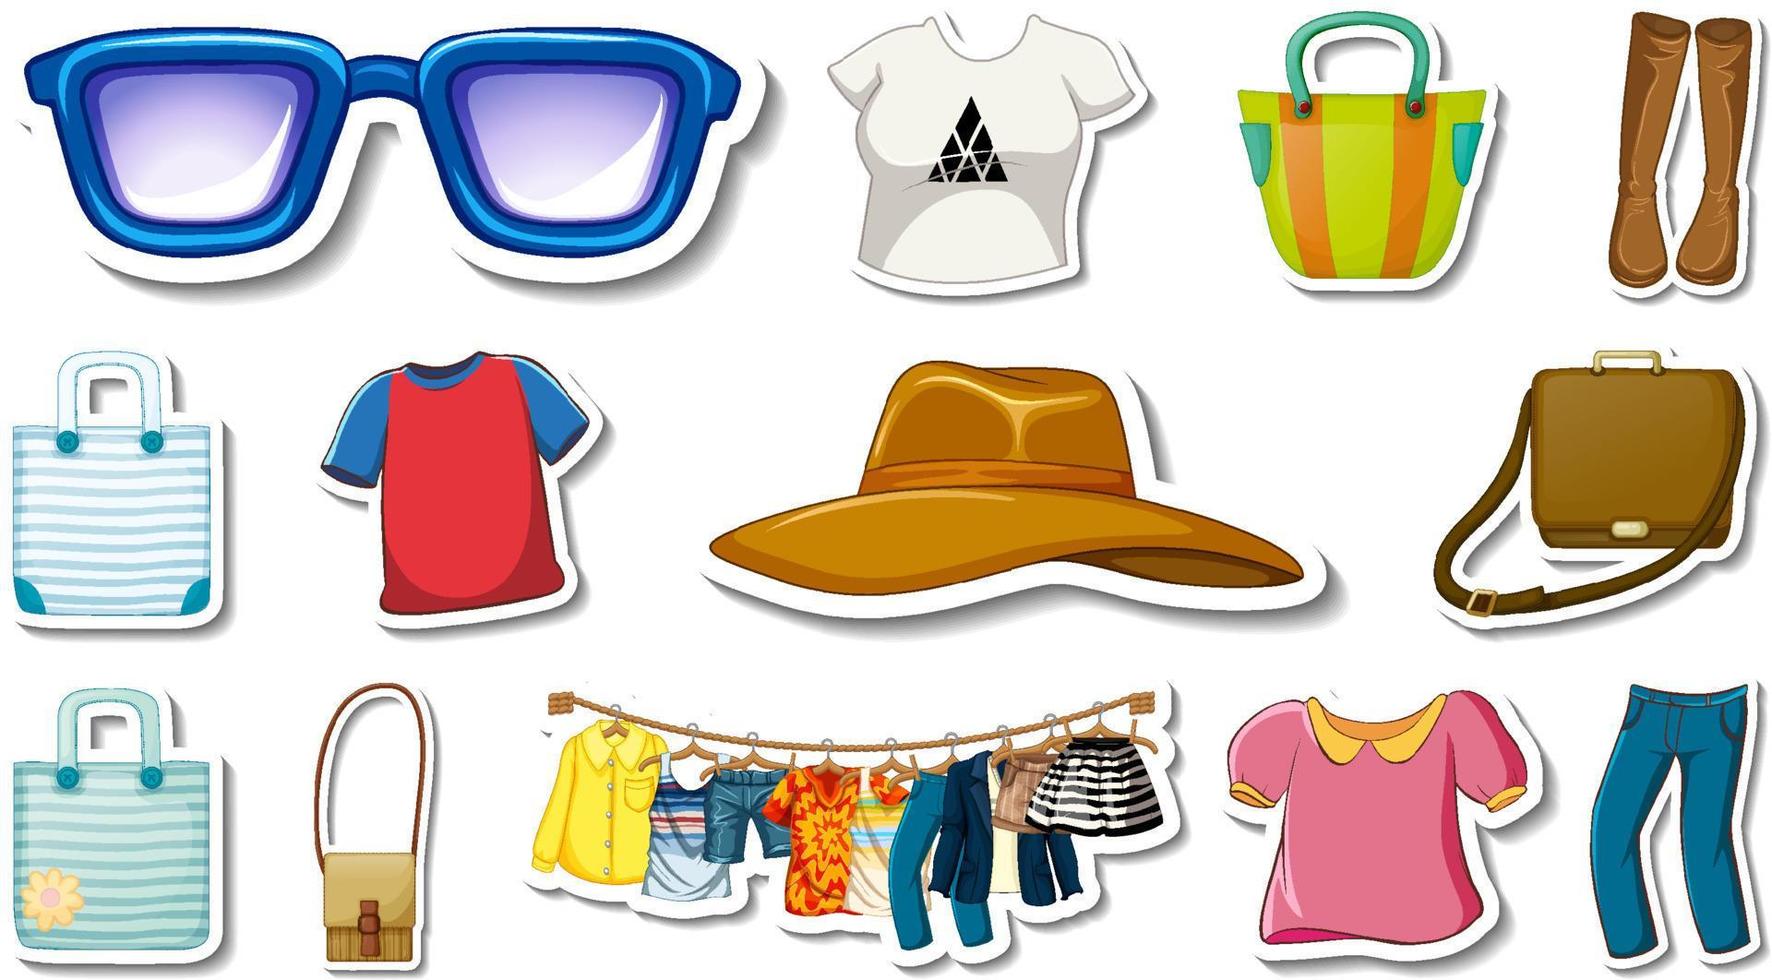 Sticker set of clothes and accessories vector